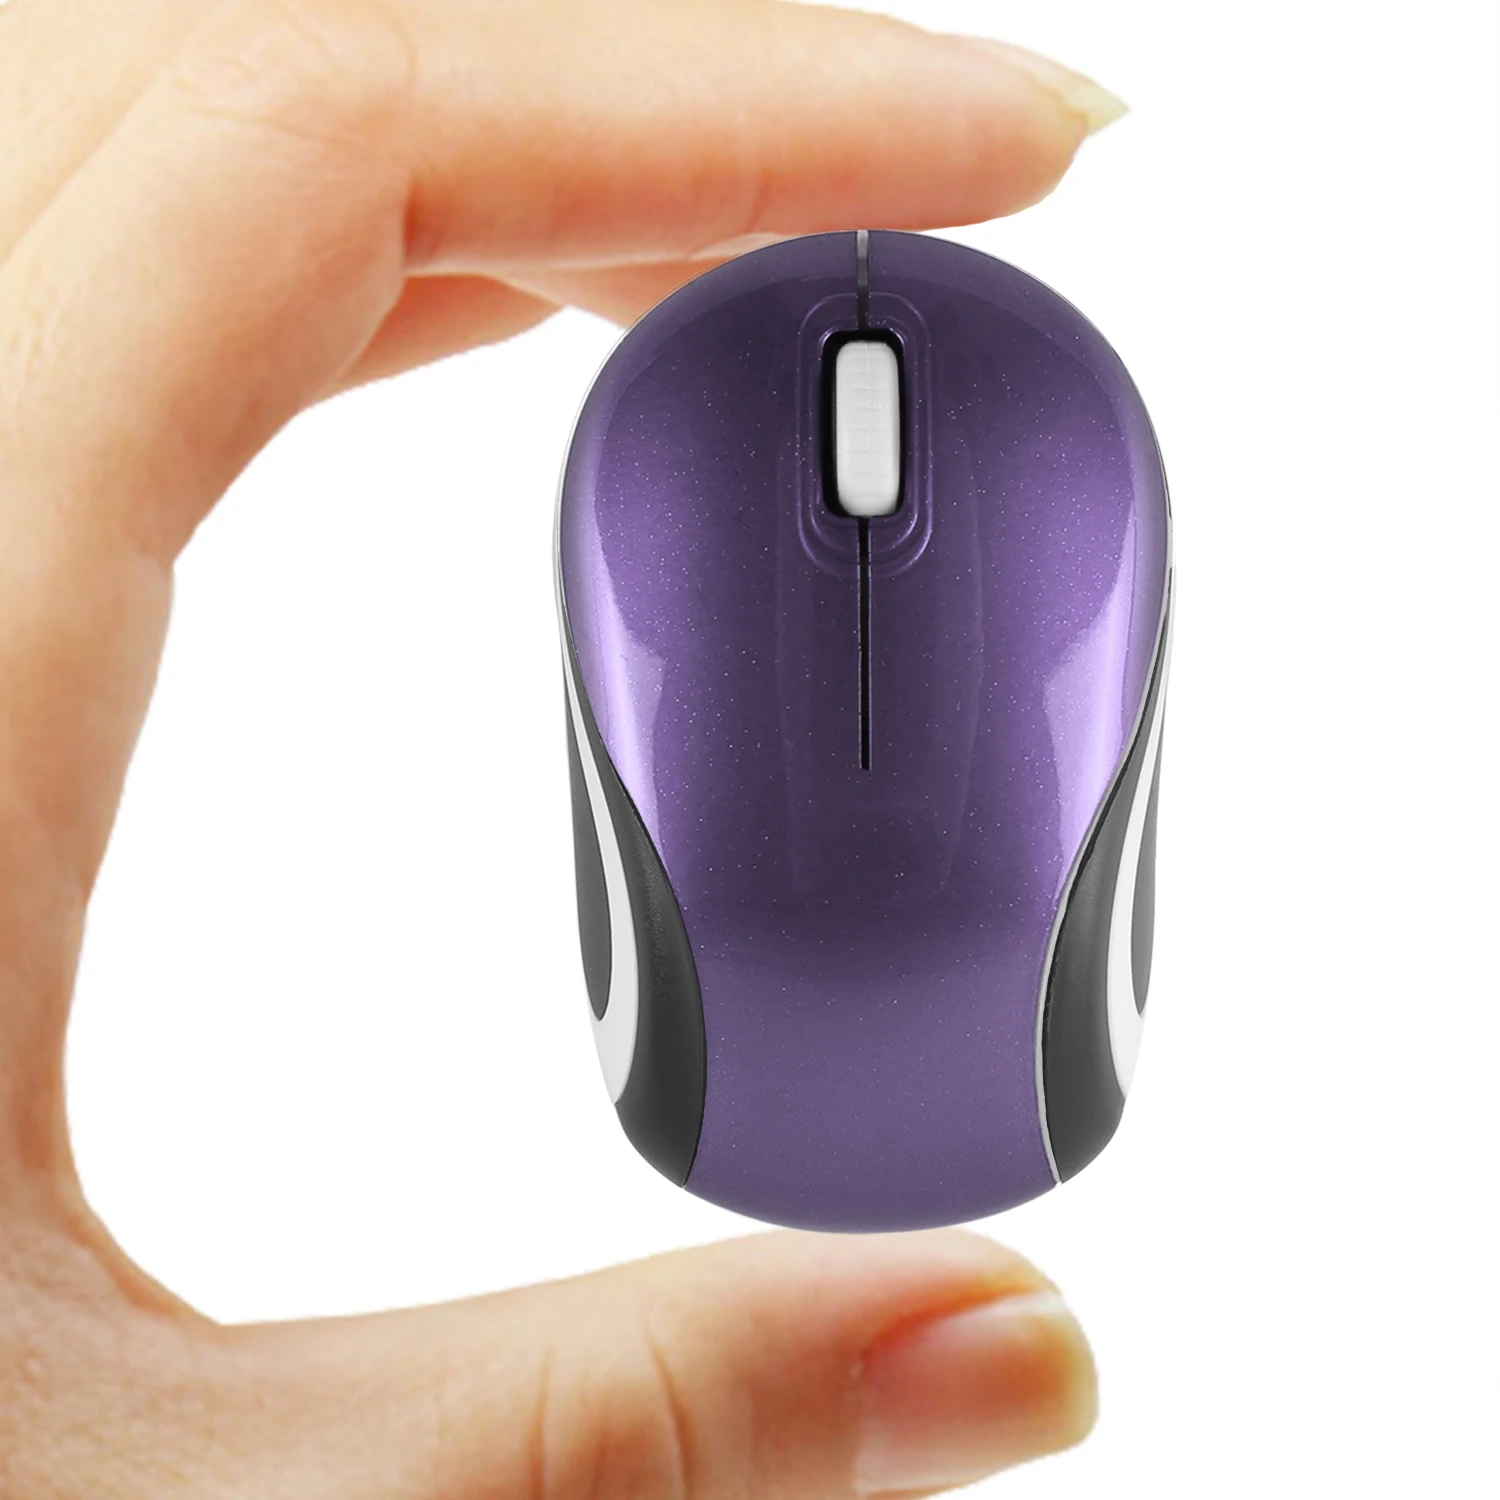 New Mini Wireless Mouse USB Optical 1600DPI 3D Gamer Mouse Gaming Small Hand USB Mice For PC Laptop Computer Child Kids Gift